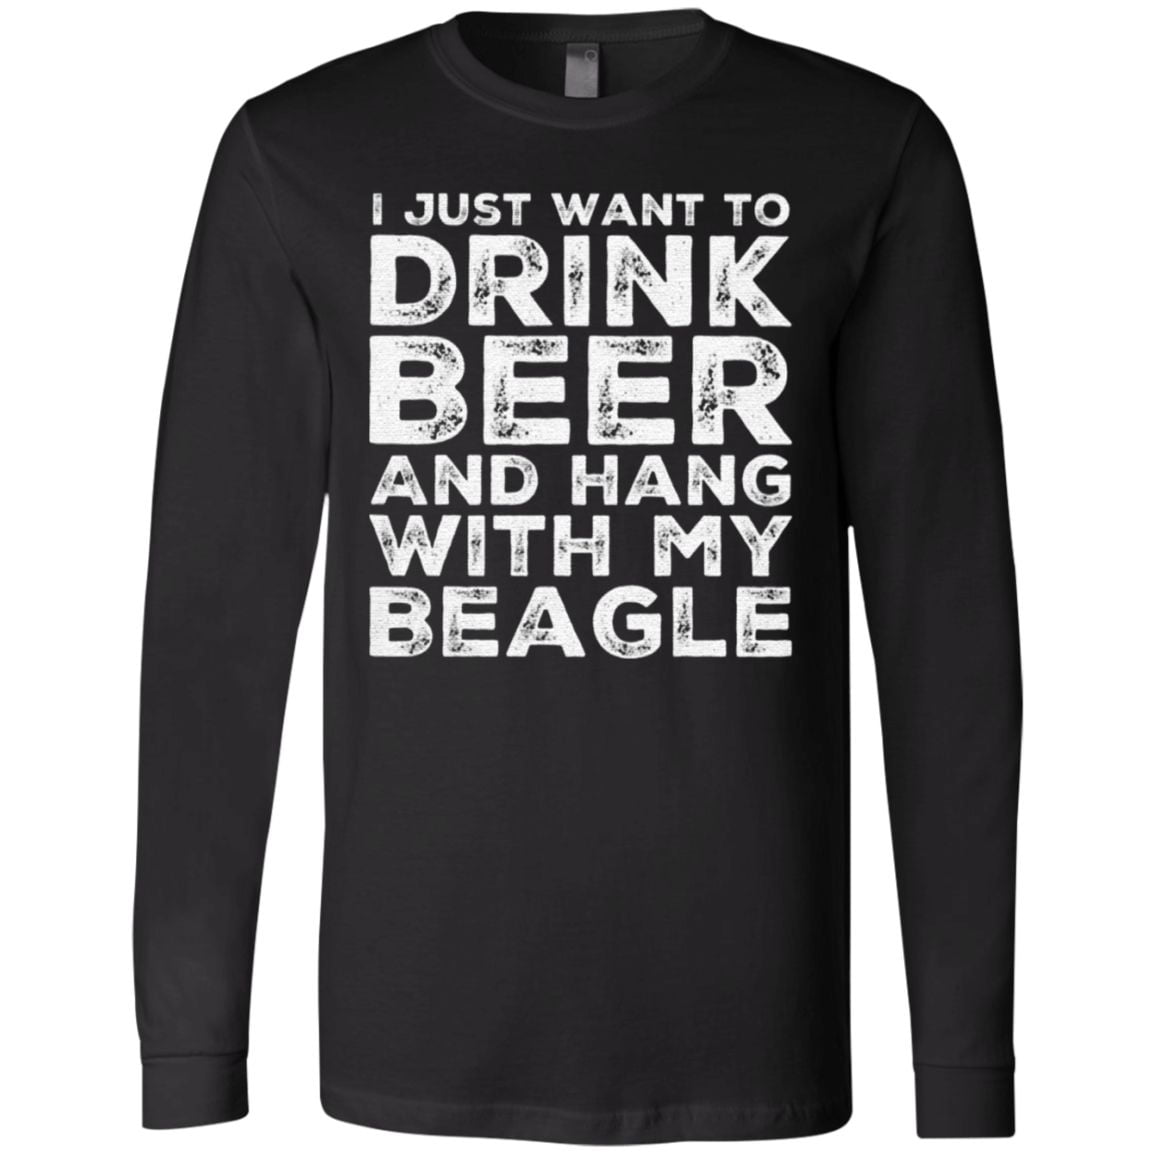 I Just Want To Drink Beer And Hang With My Beagle TShirt